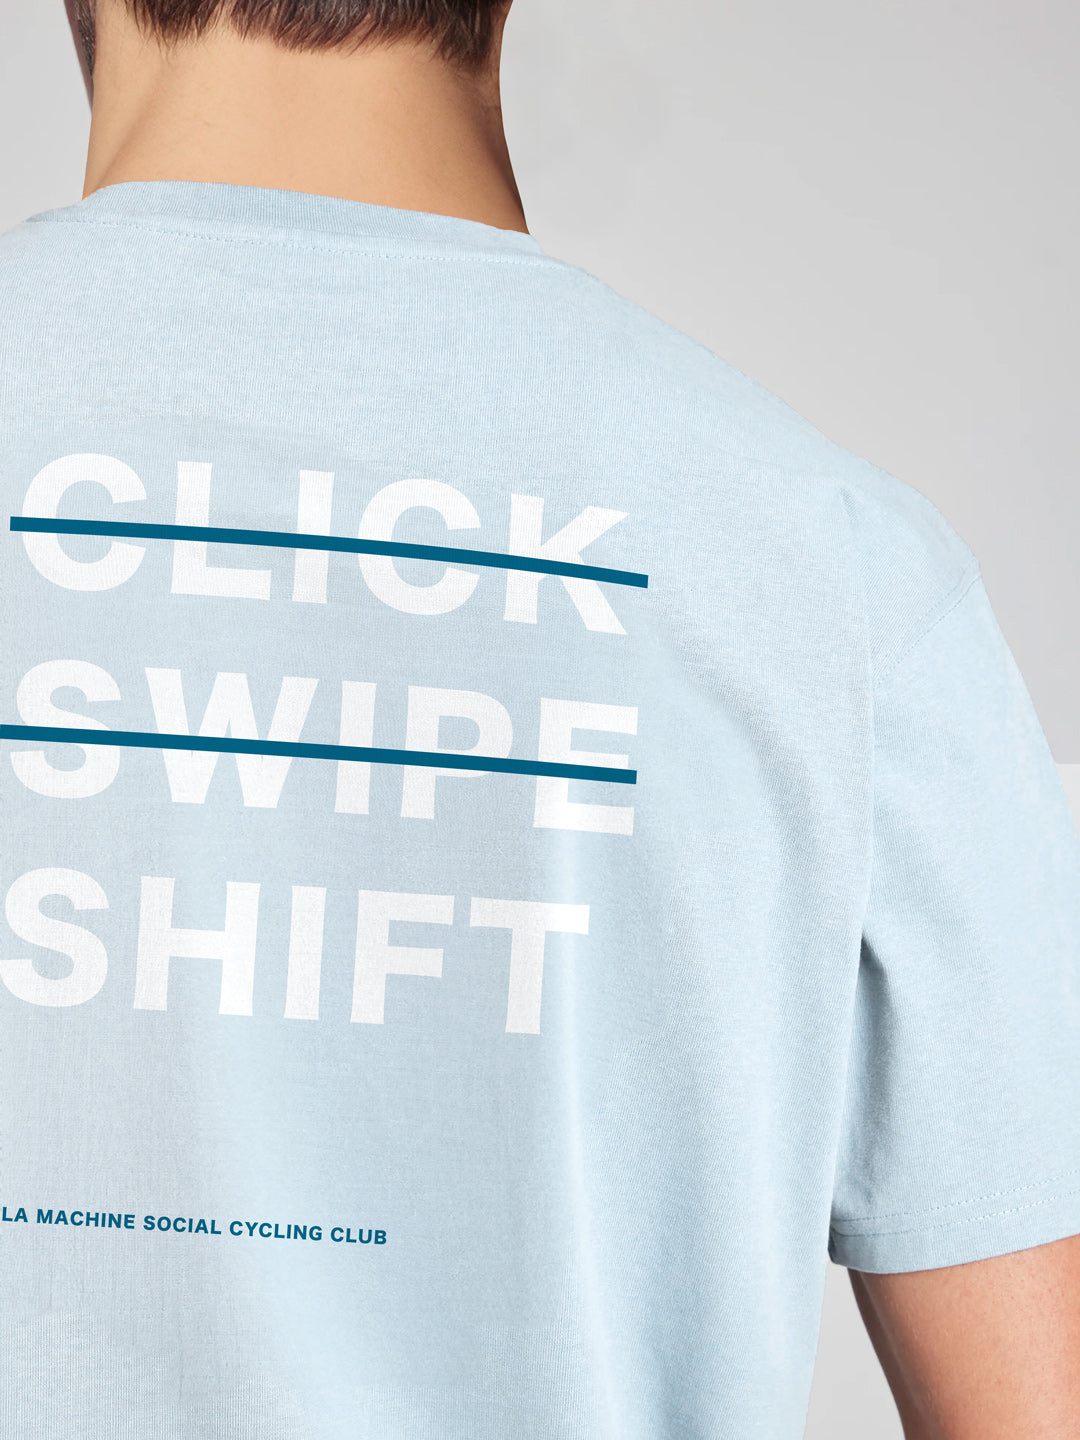 Social Cycling Club - Relaxed Fit - T-shirt